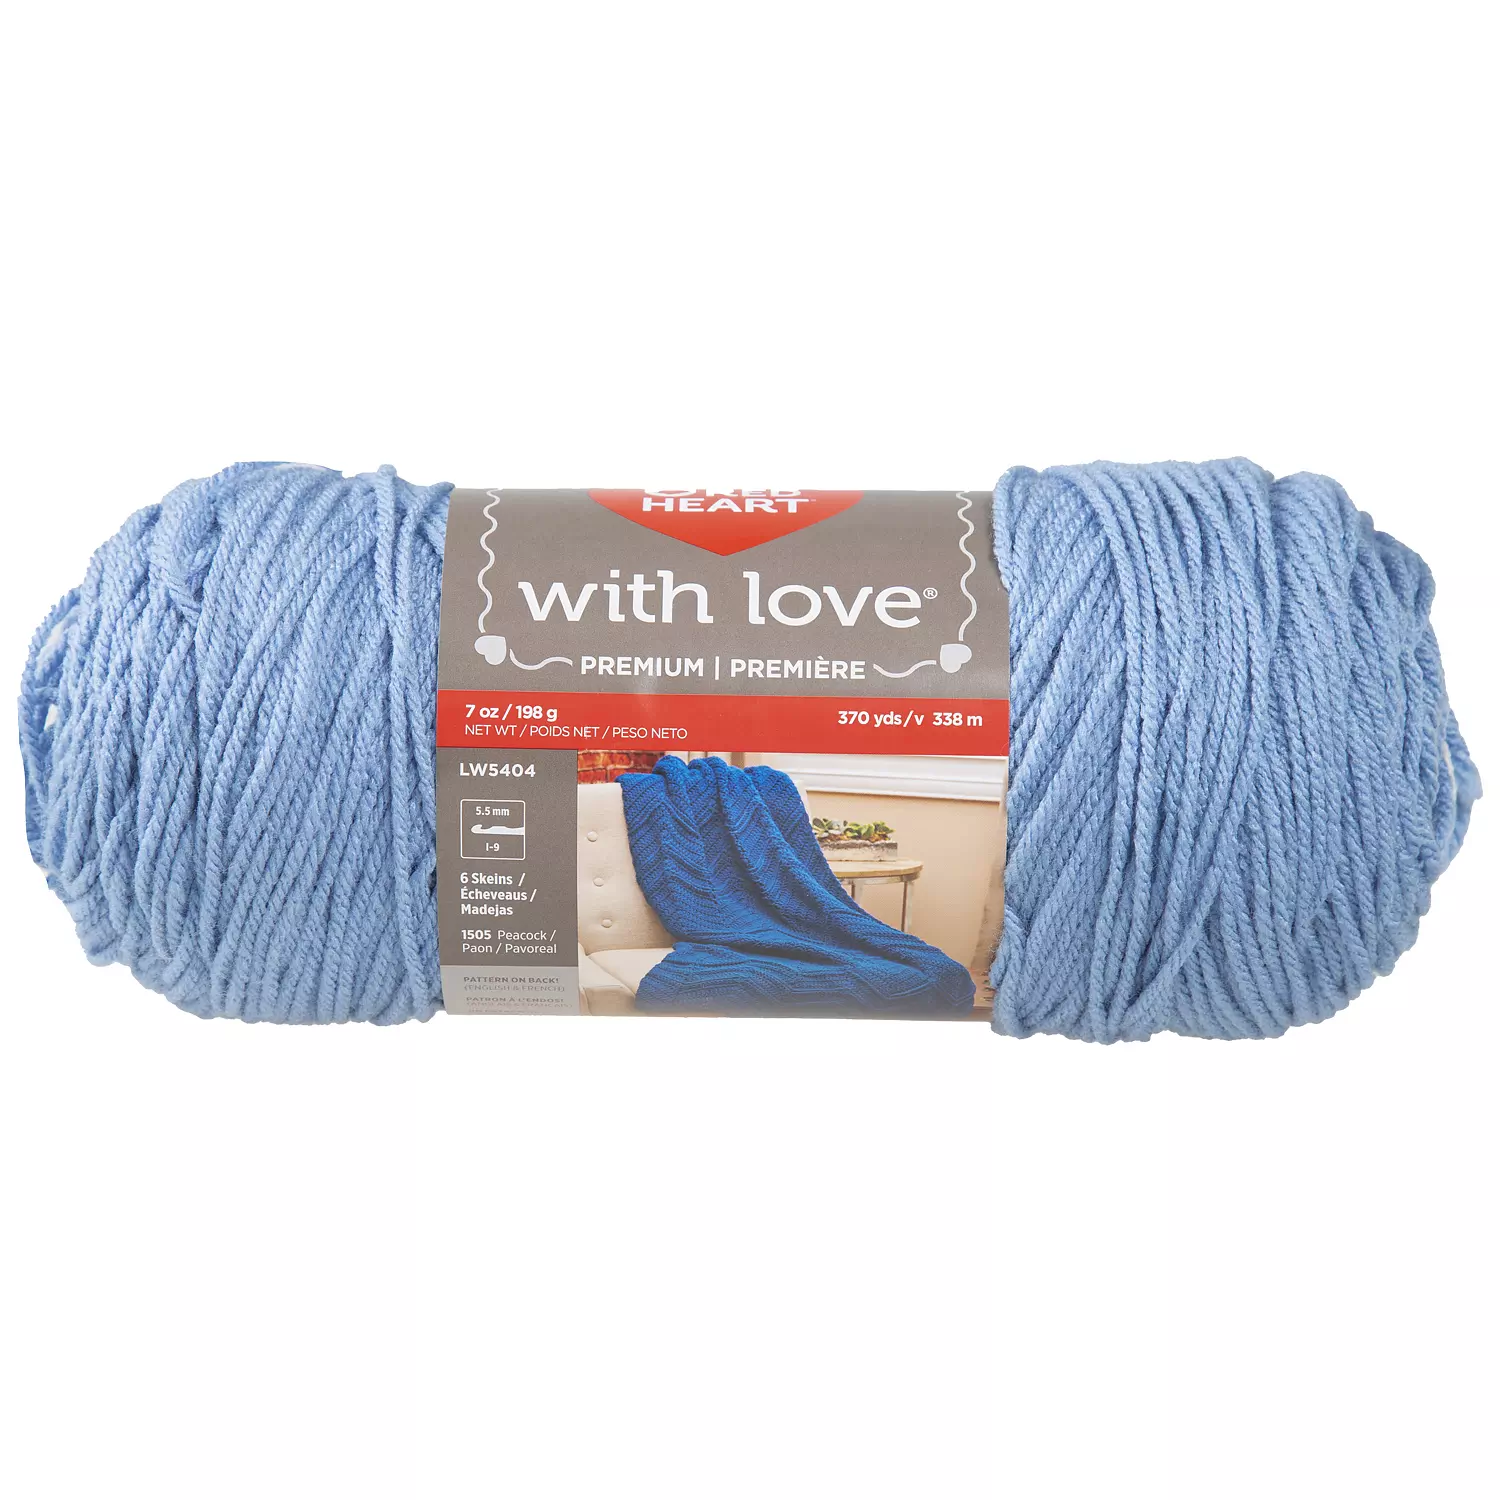 Red Heart With Love - Yarn, bluebell